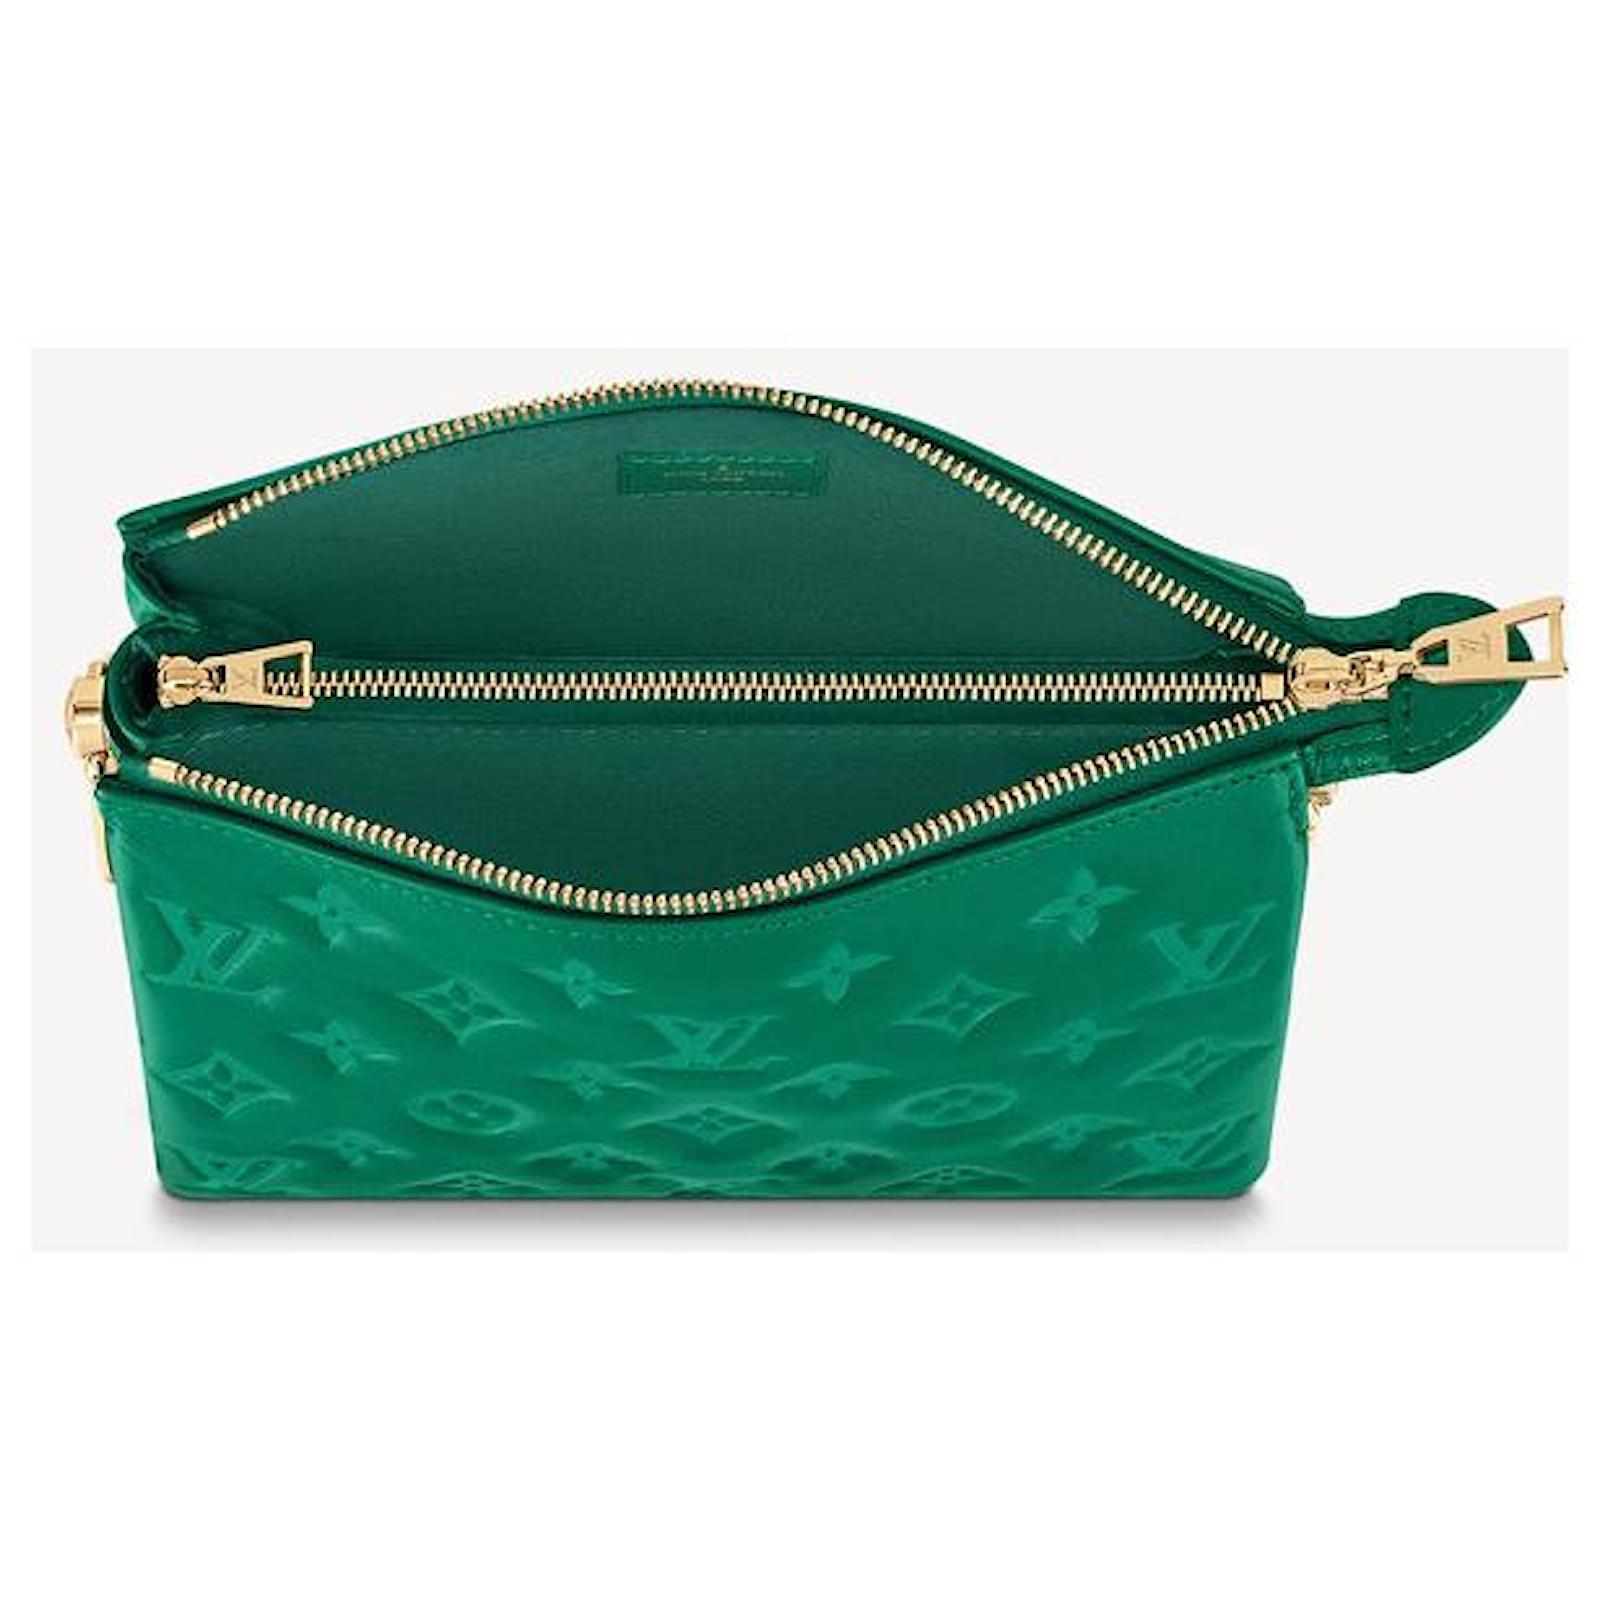 Coussin leather handbag Louis Vuitton Green in Leather - 28907015